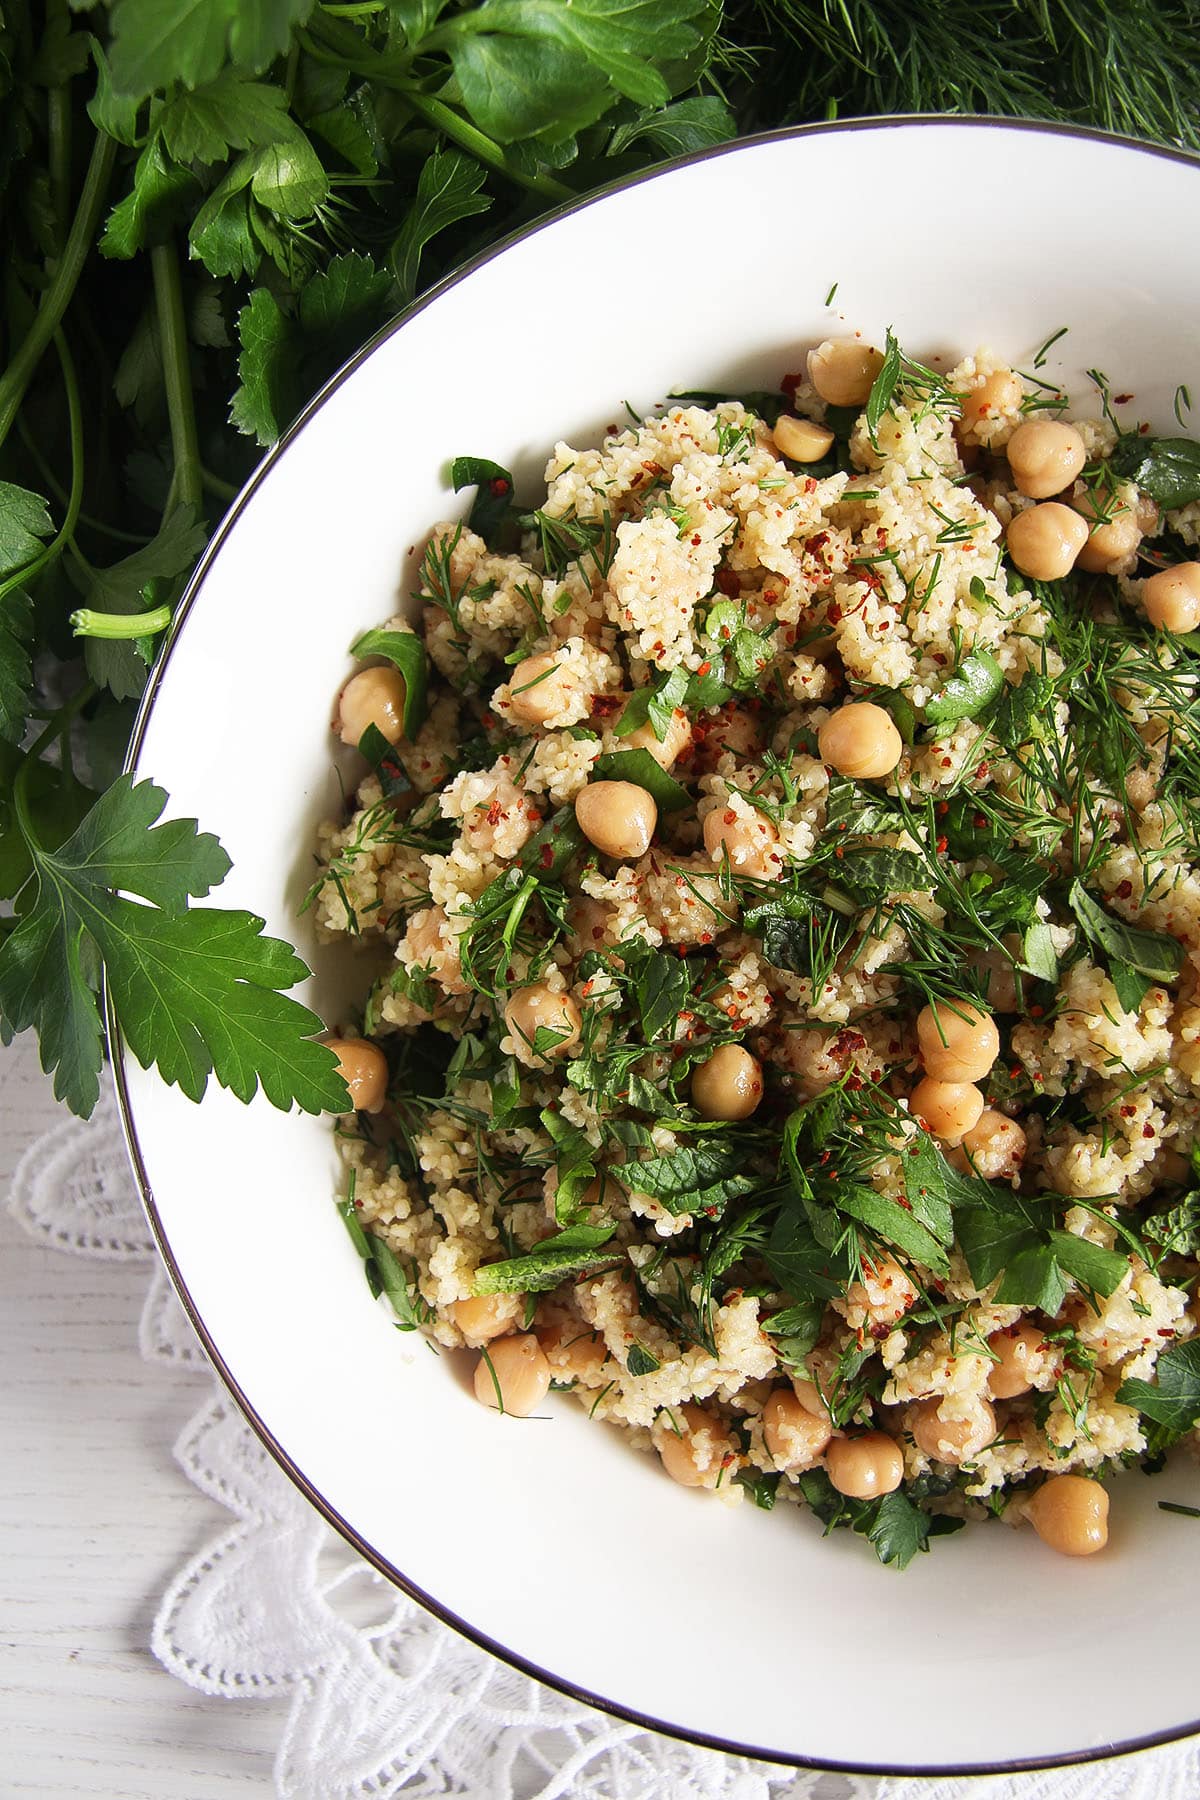 image showing half a white bowl full of bulgur salad with chickpeas and herbs.